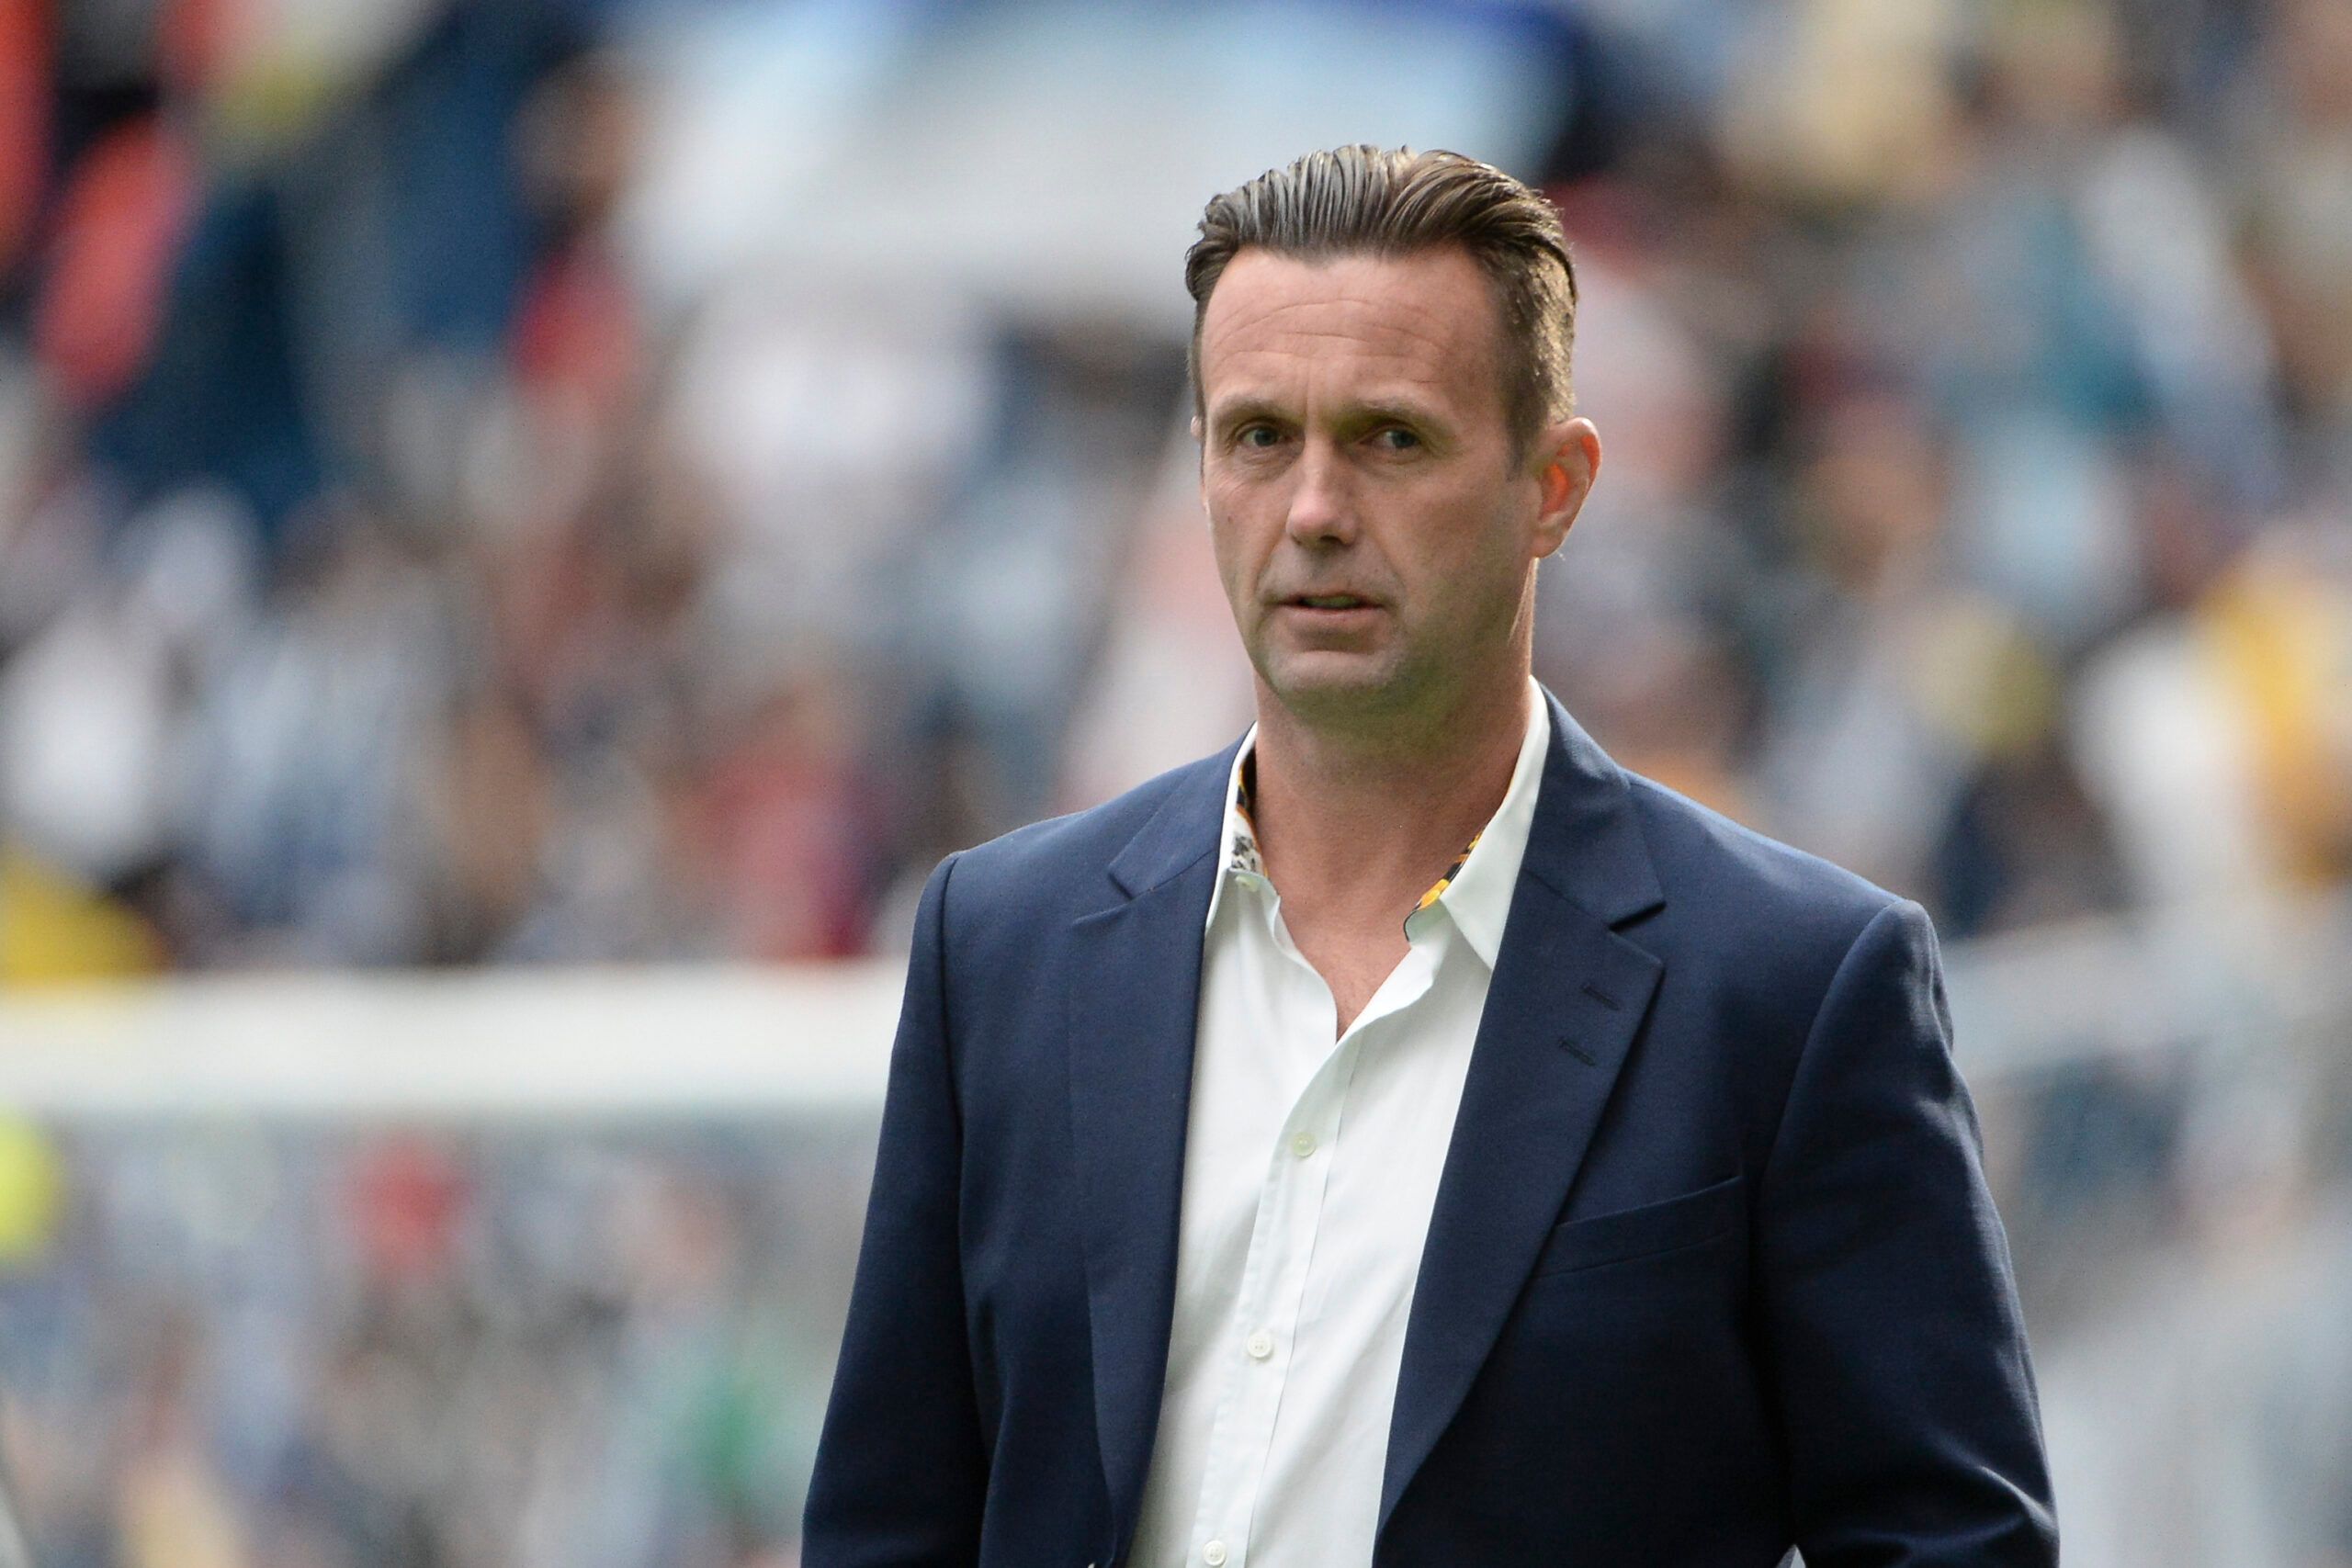 Mar 5, 2022; Vancouver, British Columbia, CAN;  New York City FC head coach Ronny Deila walks onto the pitch before the start of the first half against the Vancouver Whitecaps at BC Place. Mandatory Credit: Anne-Marie Sorvin-USA TODAY Sports